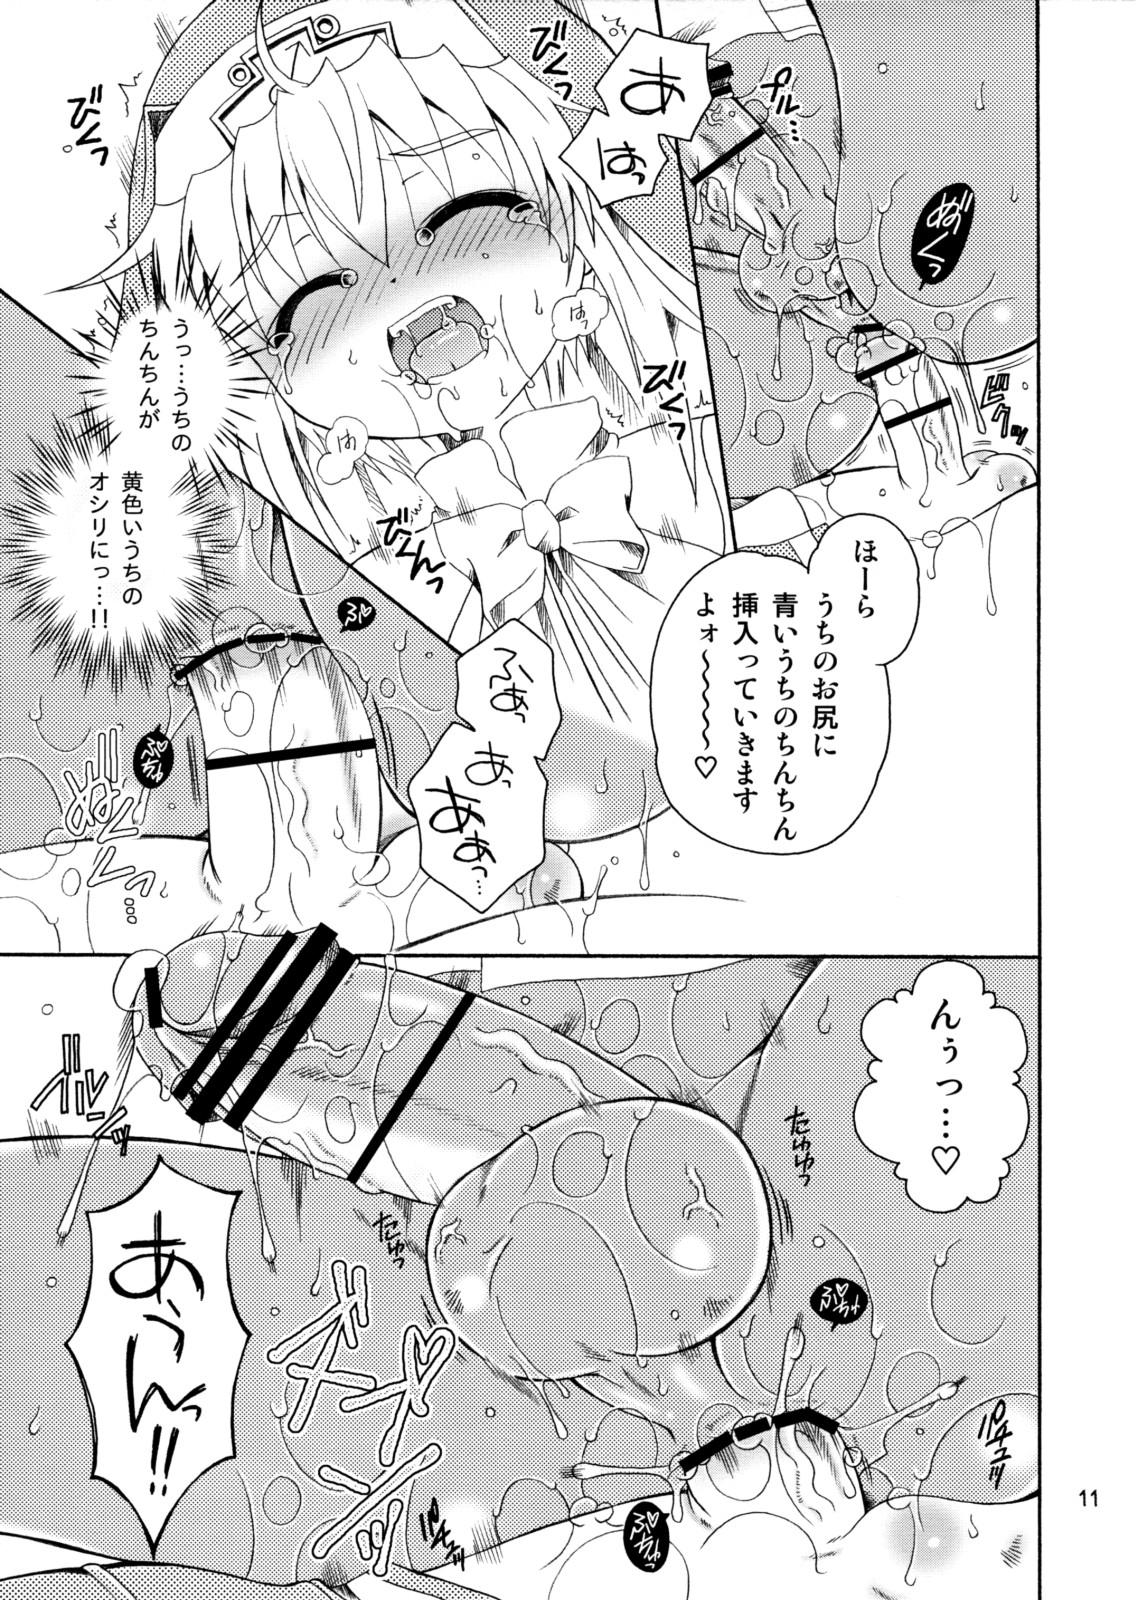 This Brilliant - Guilty gear Chinese - Page 10